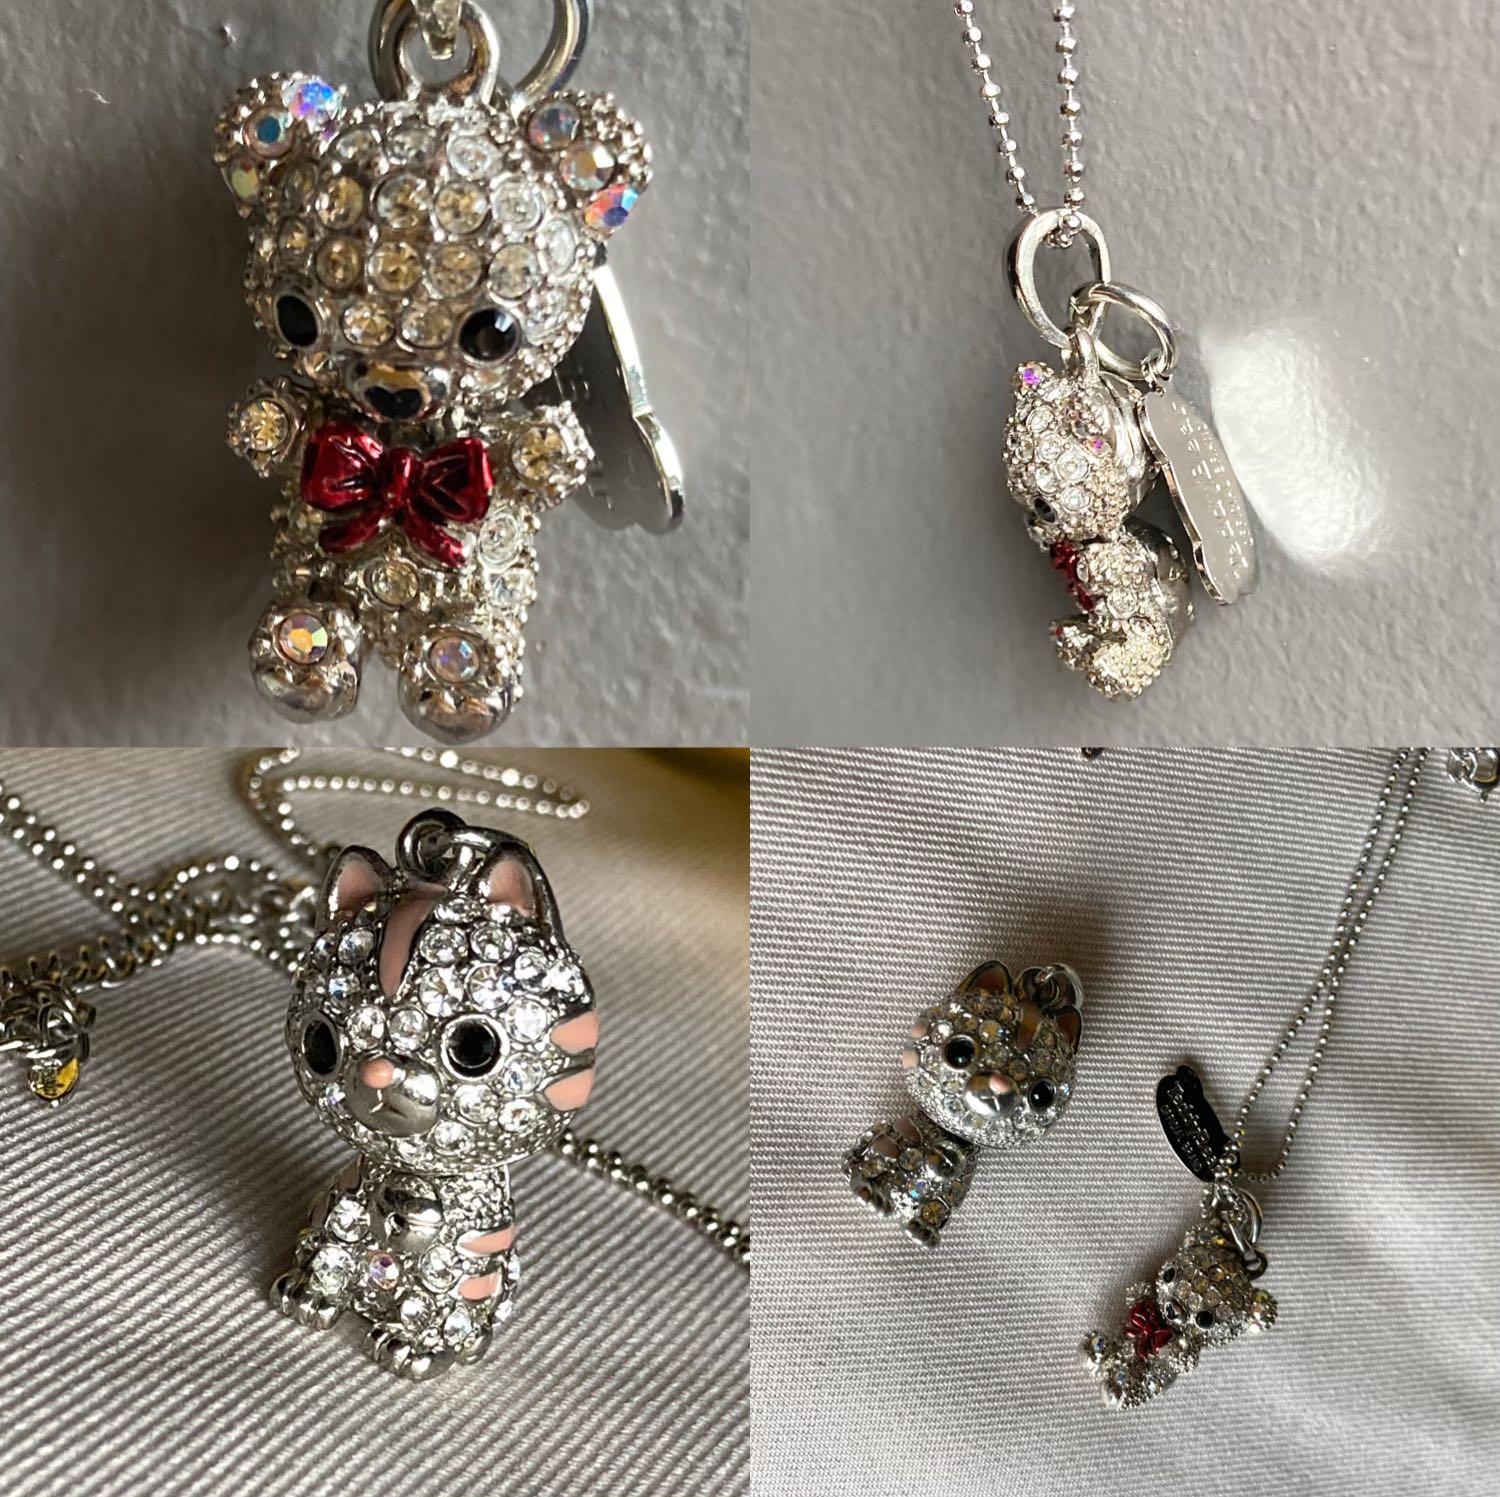 Teddy Bear Charm Necklace | Reeves & Reeves